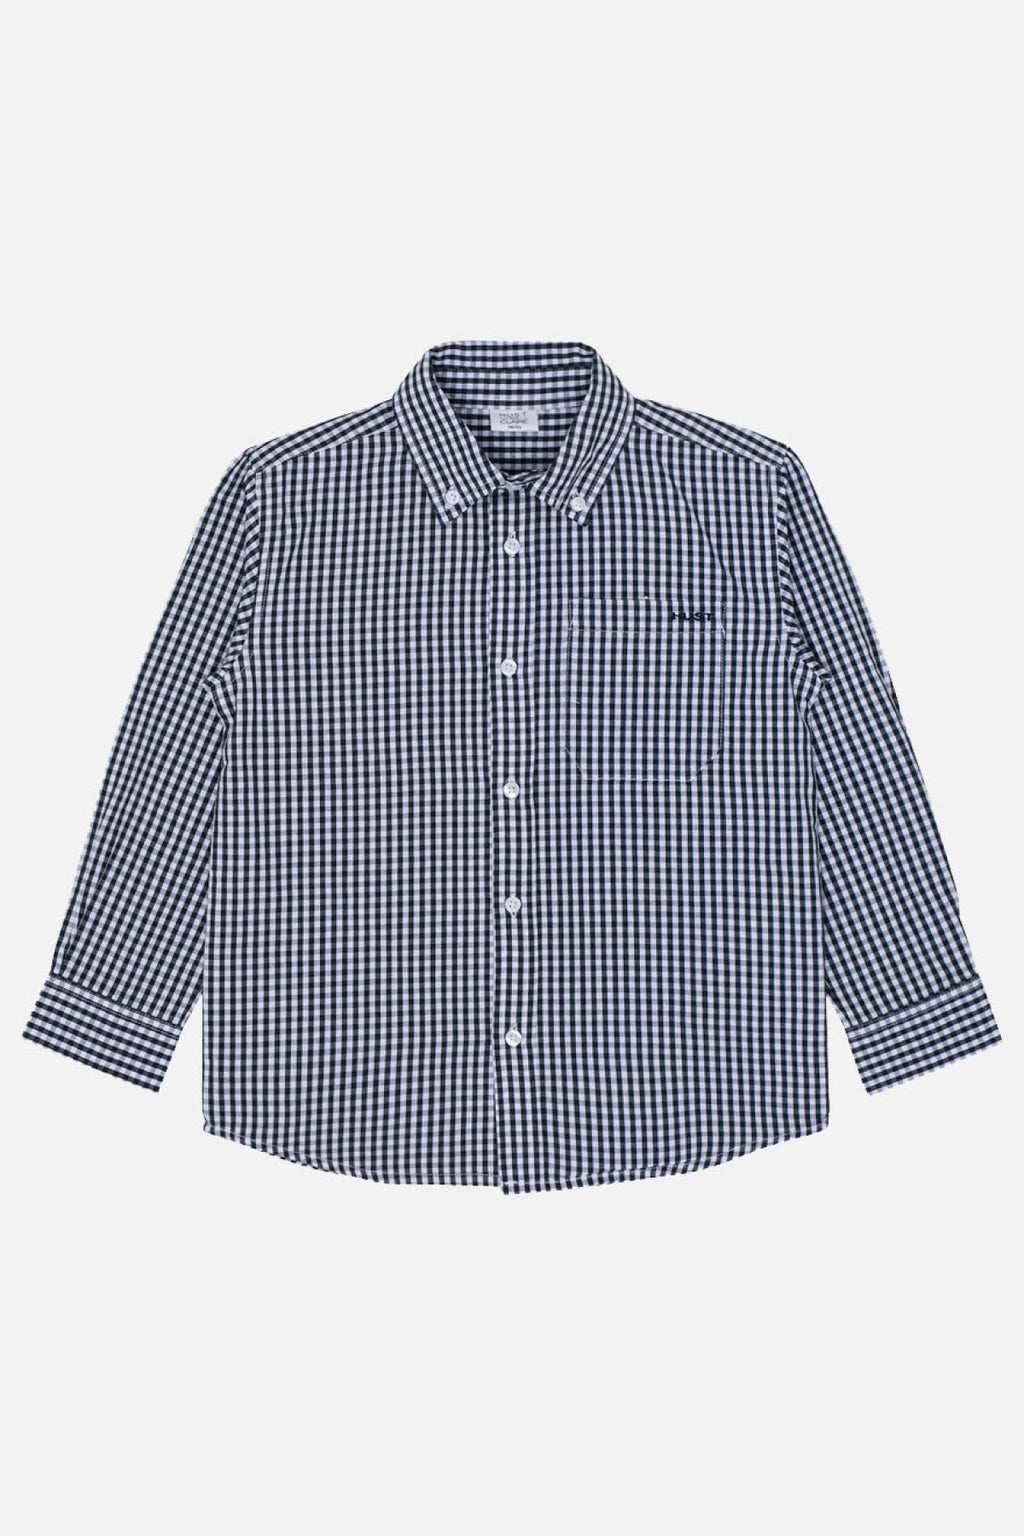 Hust and Claire Rene Shirt Navy